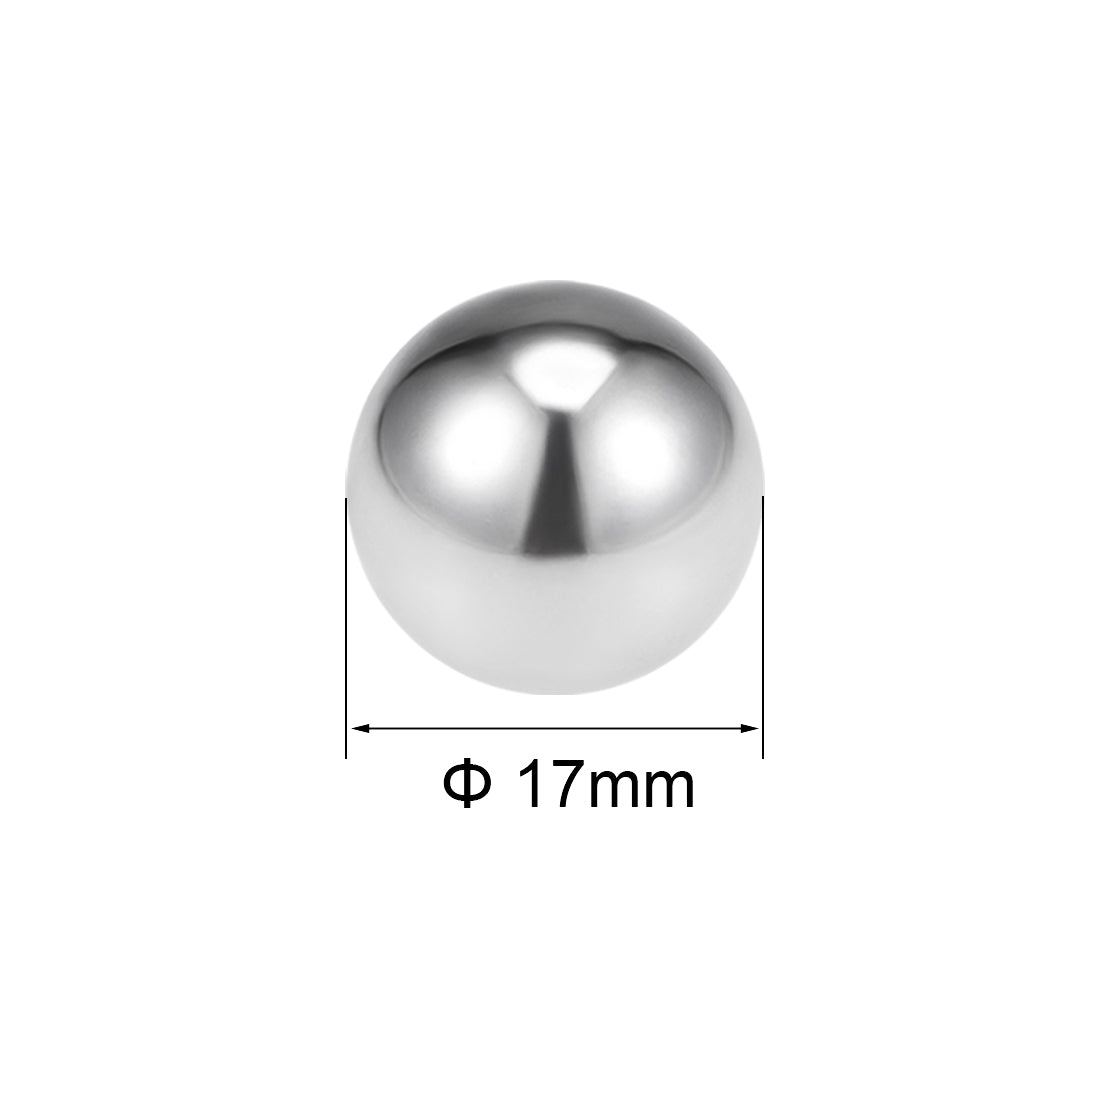 Uxcell Uxcell 20mm Bearing Balls 304 Stainless Steel G100 Precision Balls 5pcs